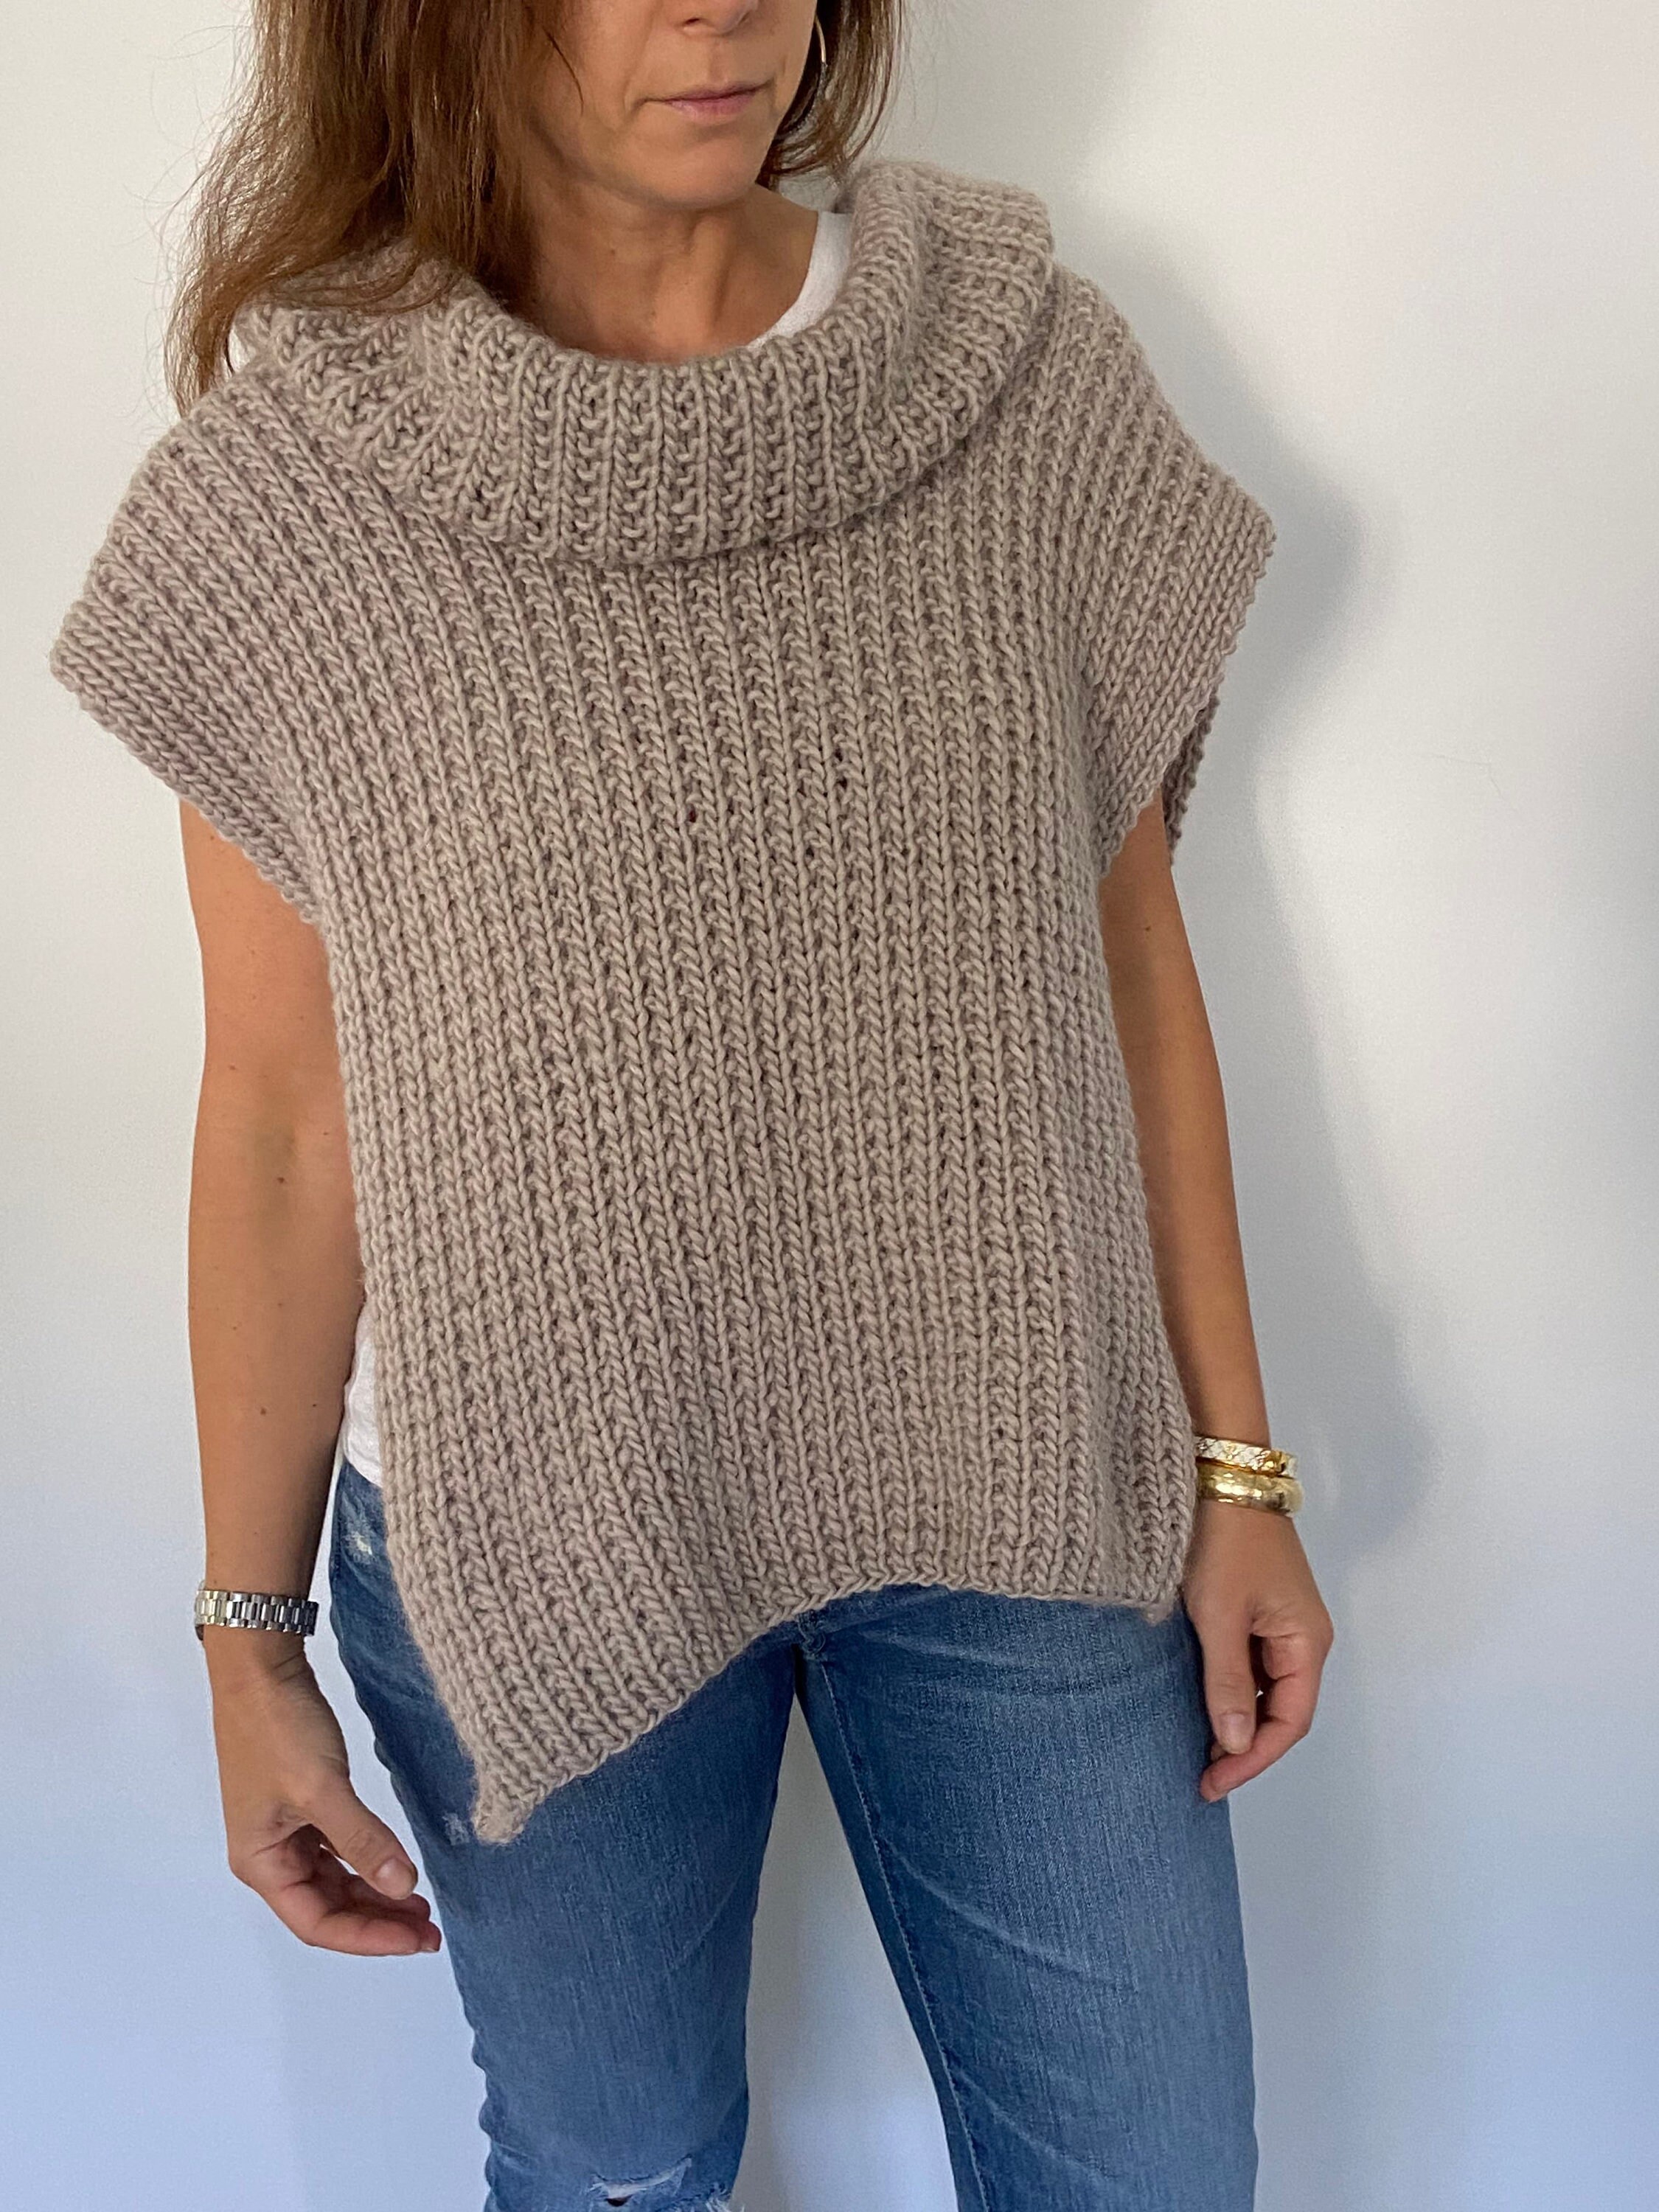  Crazy Cousin White V-Neck Sweater with Black Dickey